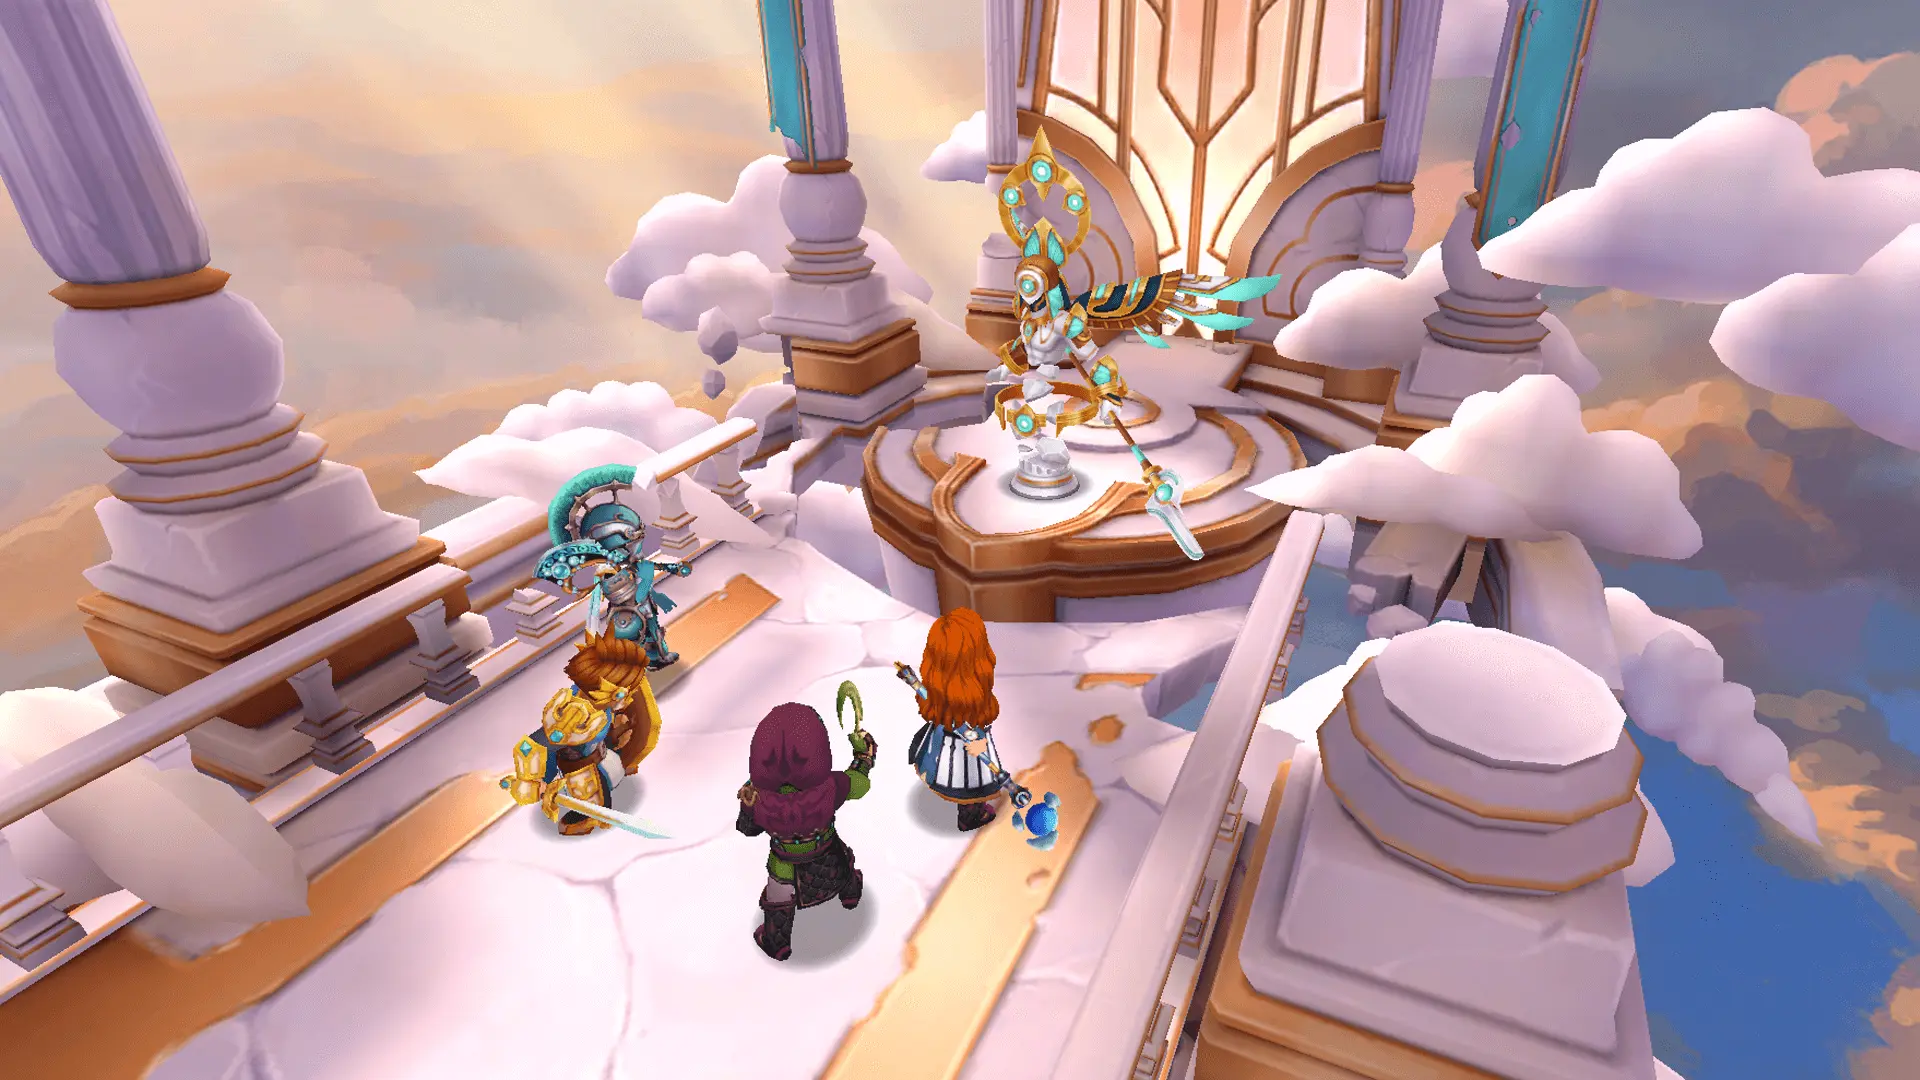 A look at the Elysium quest area.